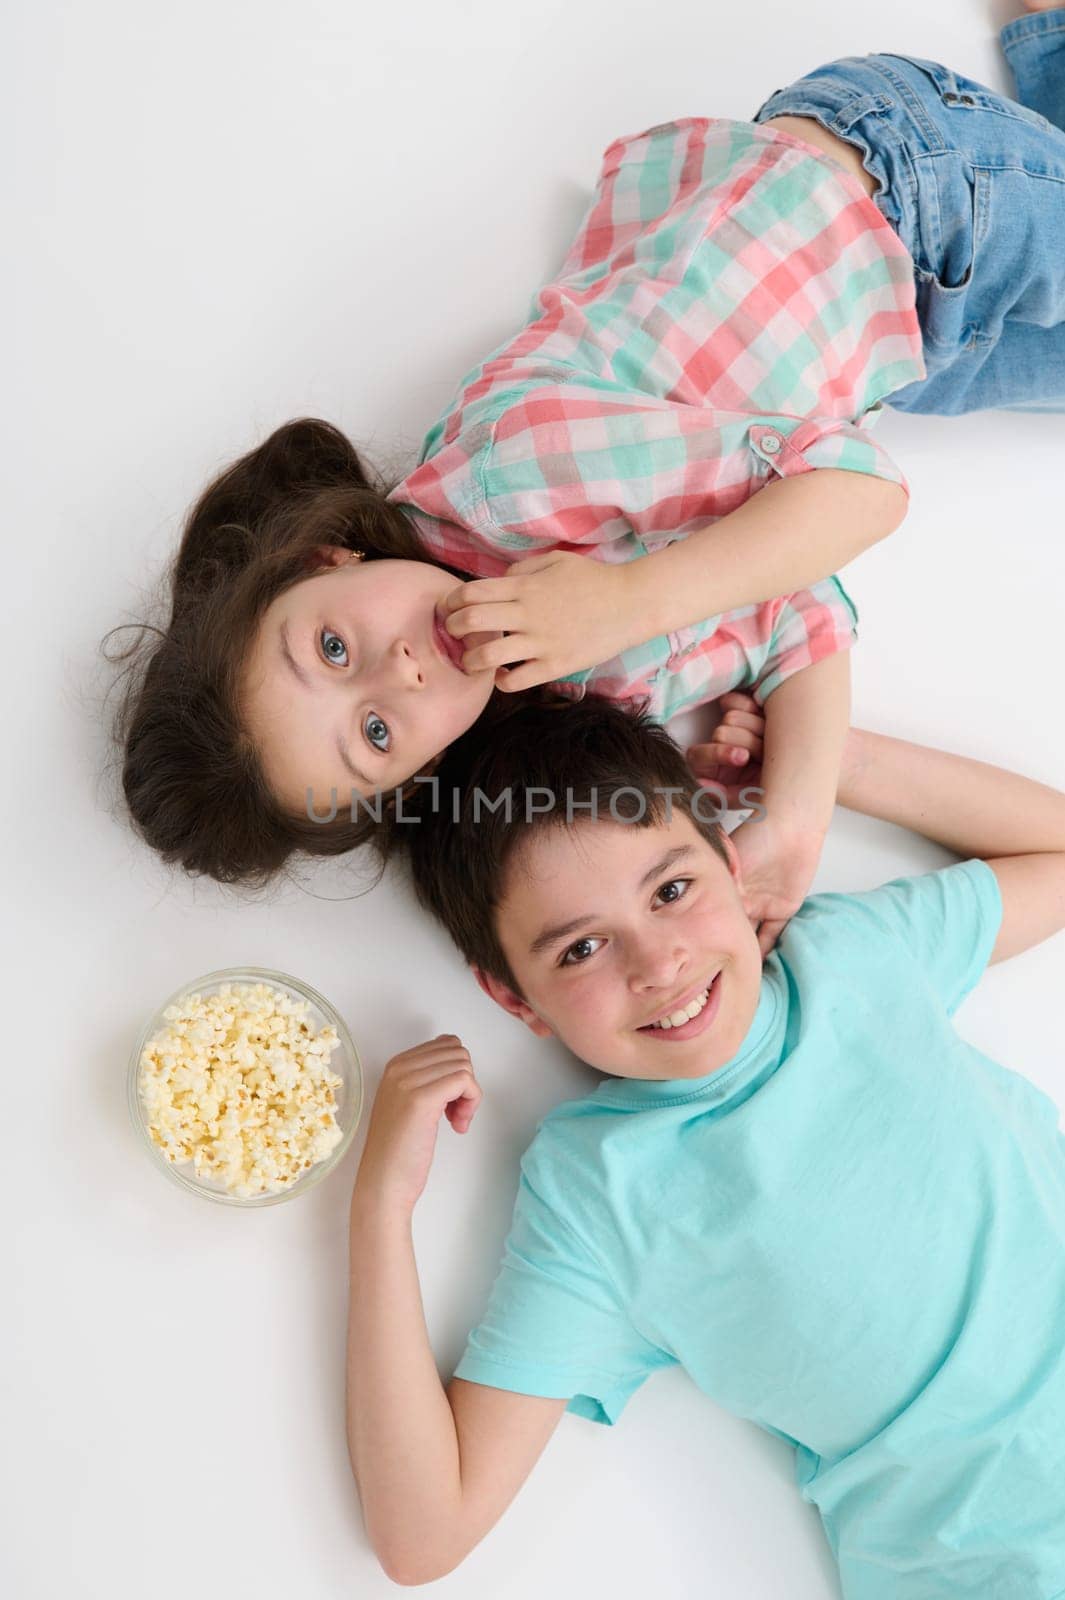 Top view happy kids, pre teen boy and little girl, brother and sister smiling looking at camera, lying on their backs on white studio background near a bowl with tasty popcorn, expressing positivity